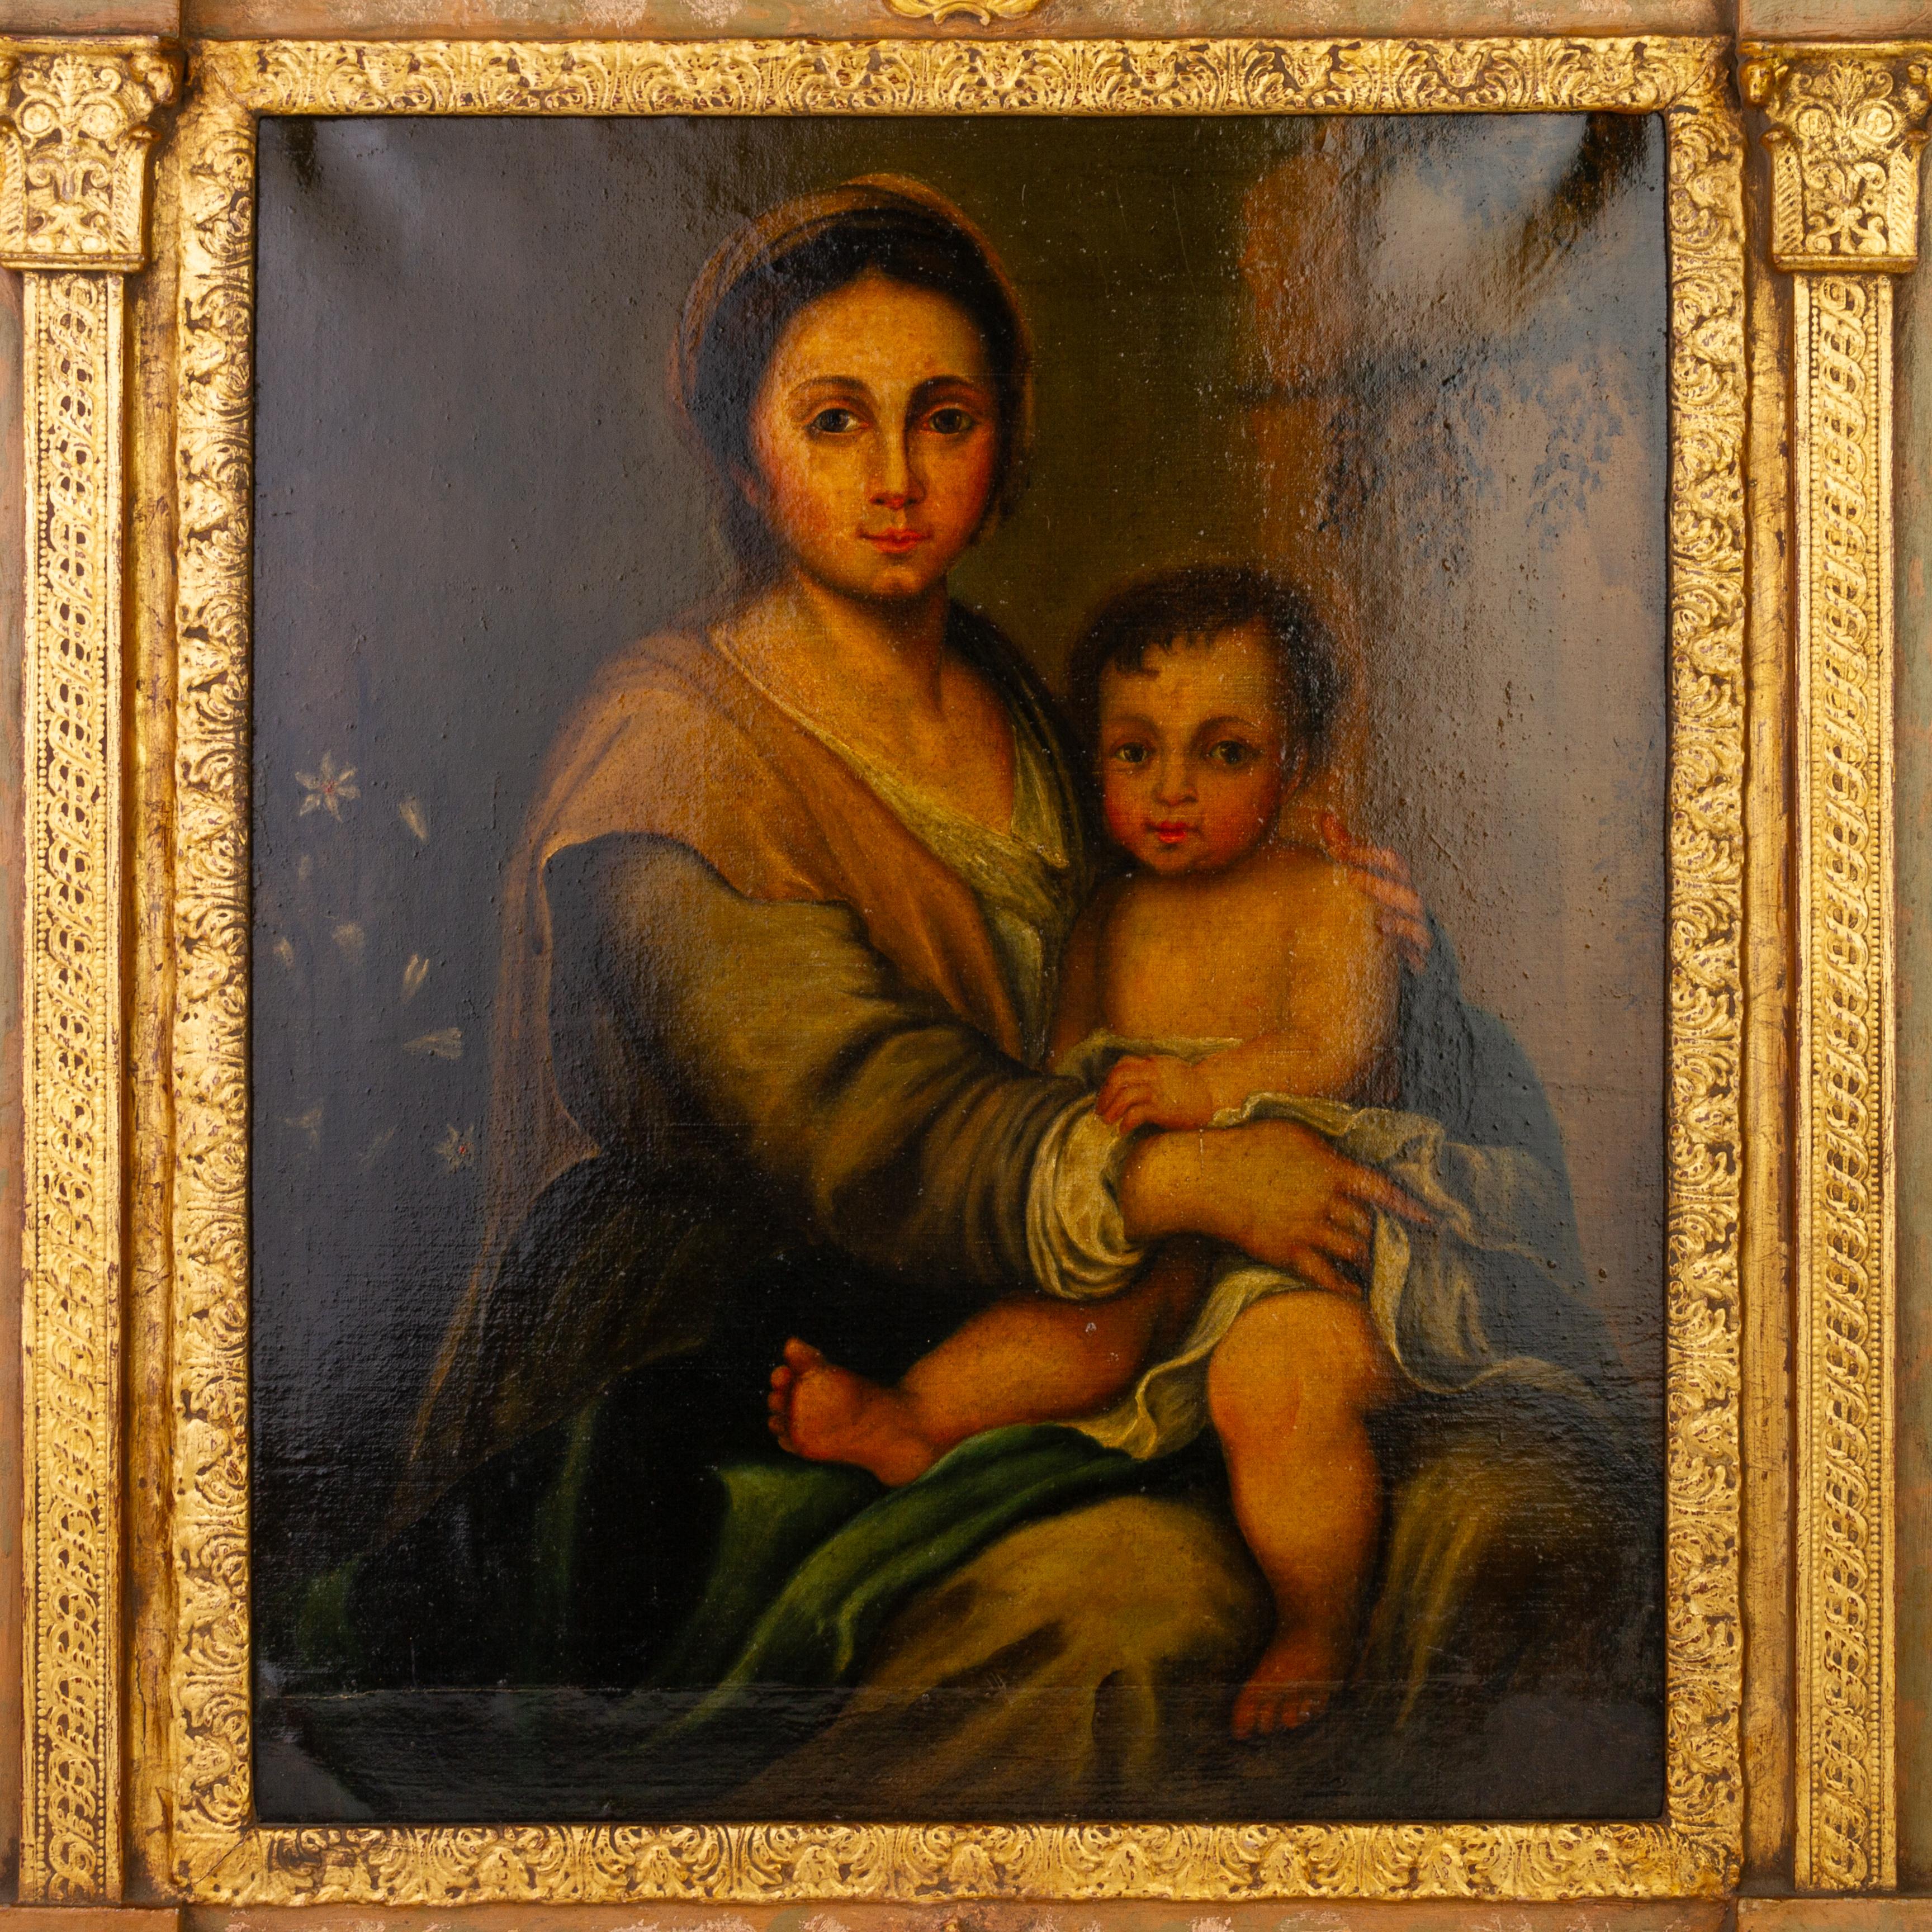 In good condition
From a private collection
Free international shipping
Manner of Bartolomé Esteban Murillo (1617-1682) Old Master Portrait
